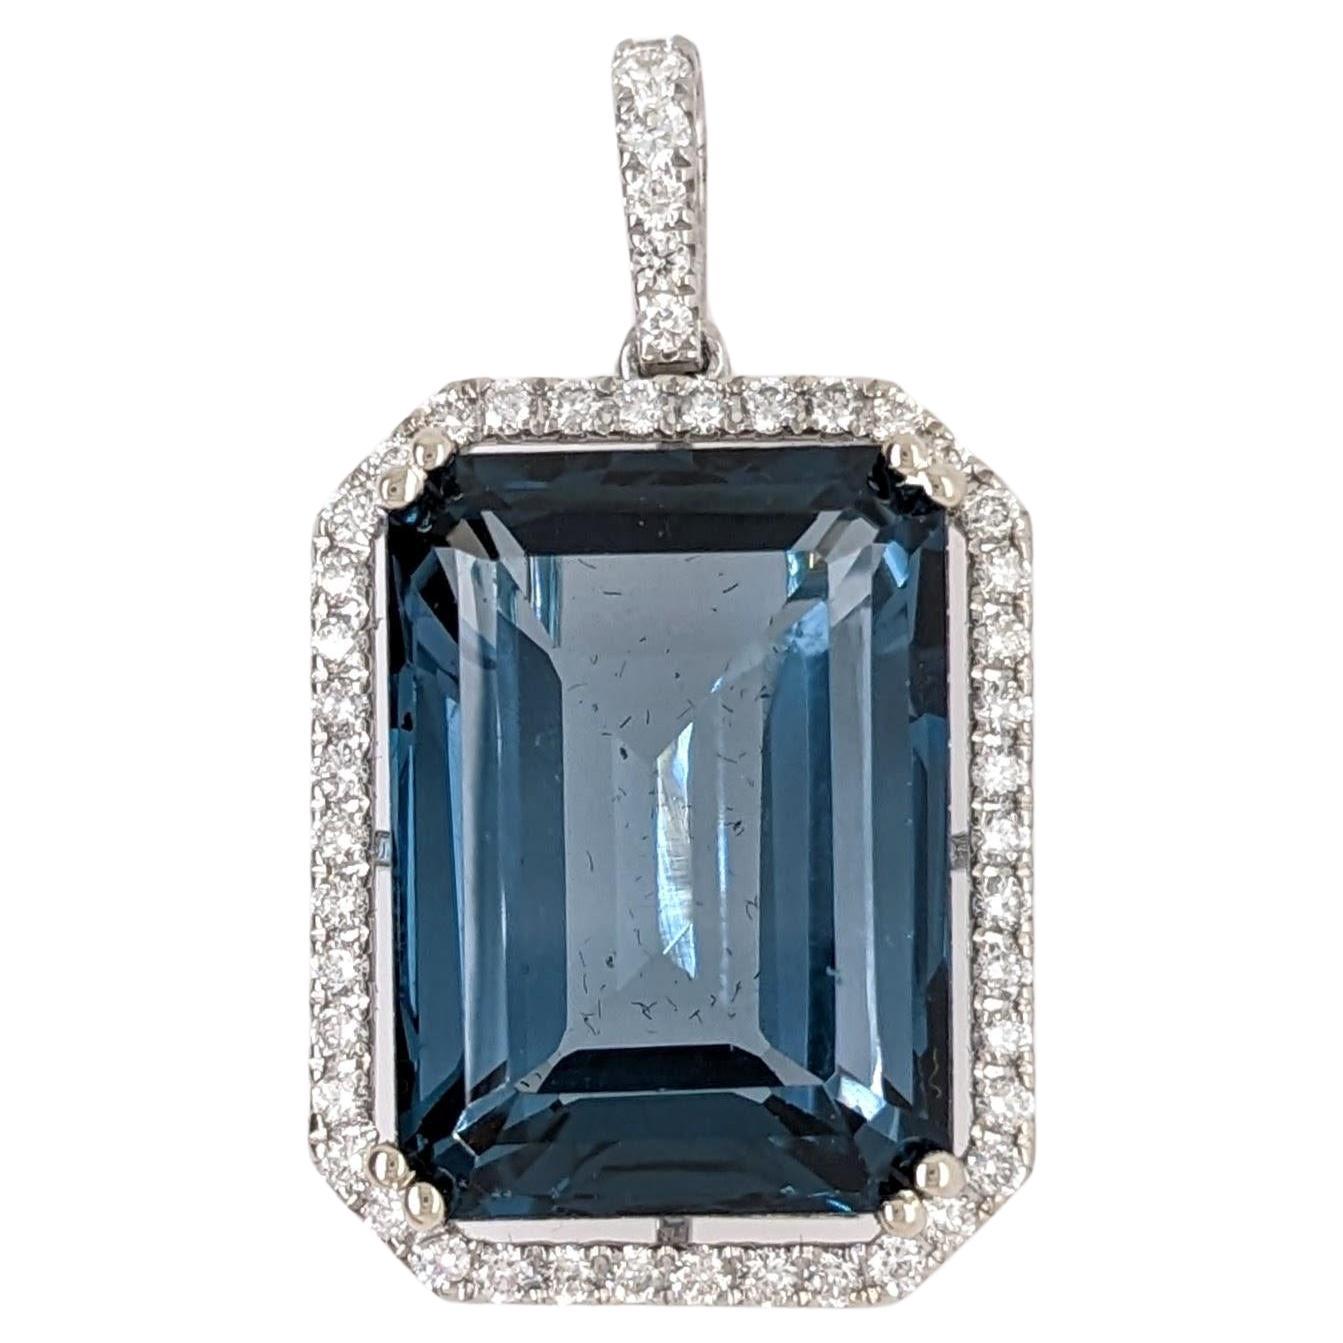 21ct London Topaz Pendant w Earth Mined Diamonds in Solid 14K Gold EM 18x13mm For Sale